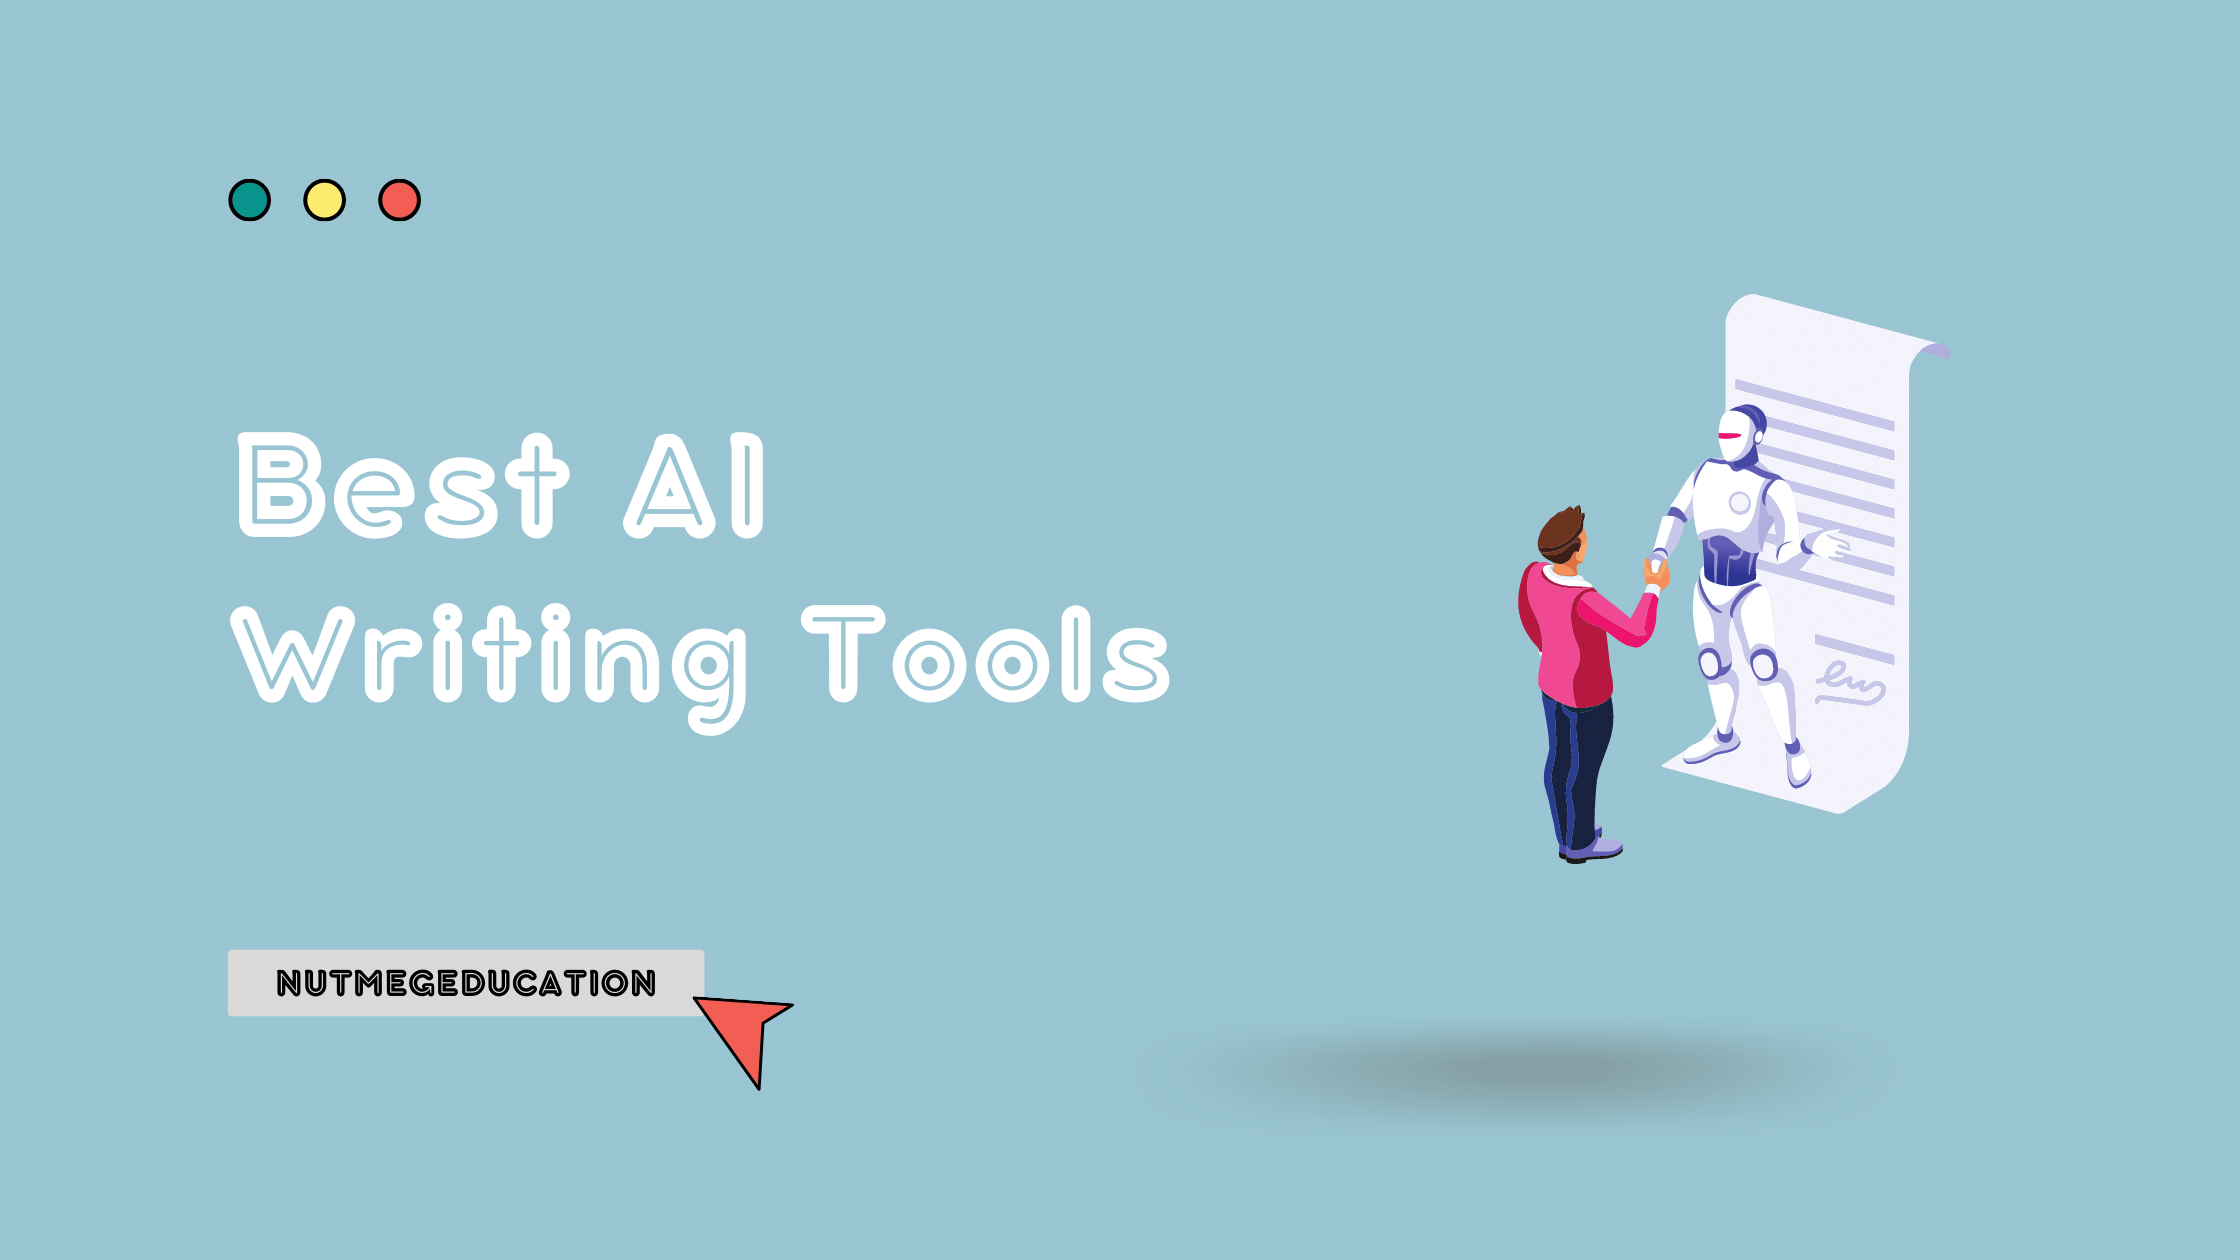 Best AI Writing Tools - NutMegEducation